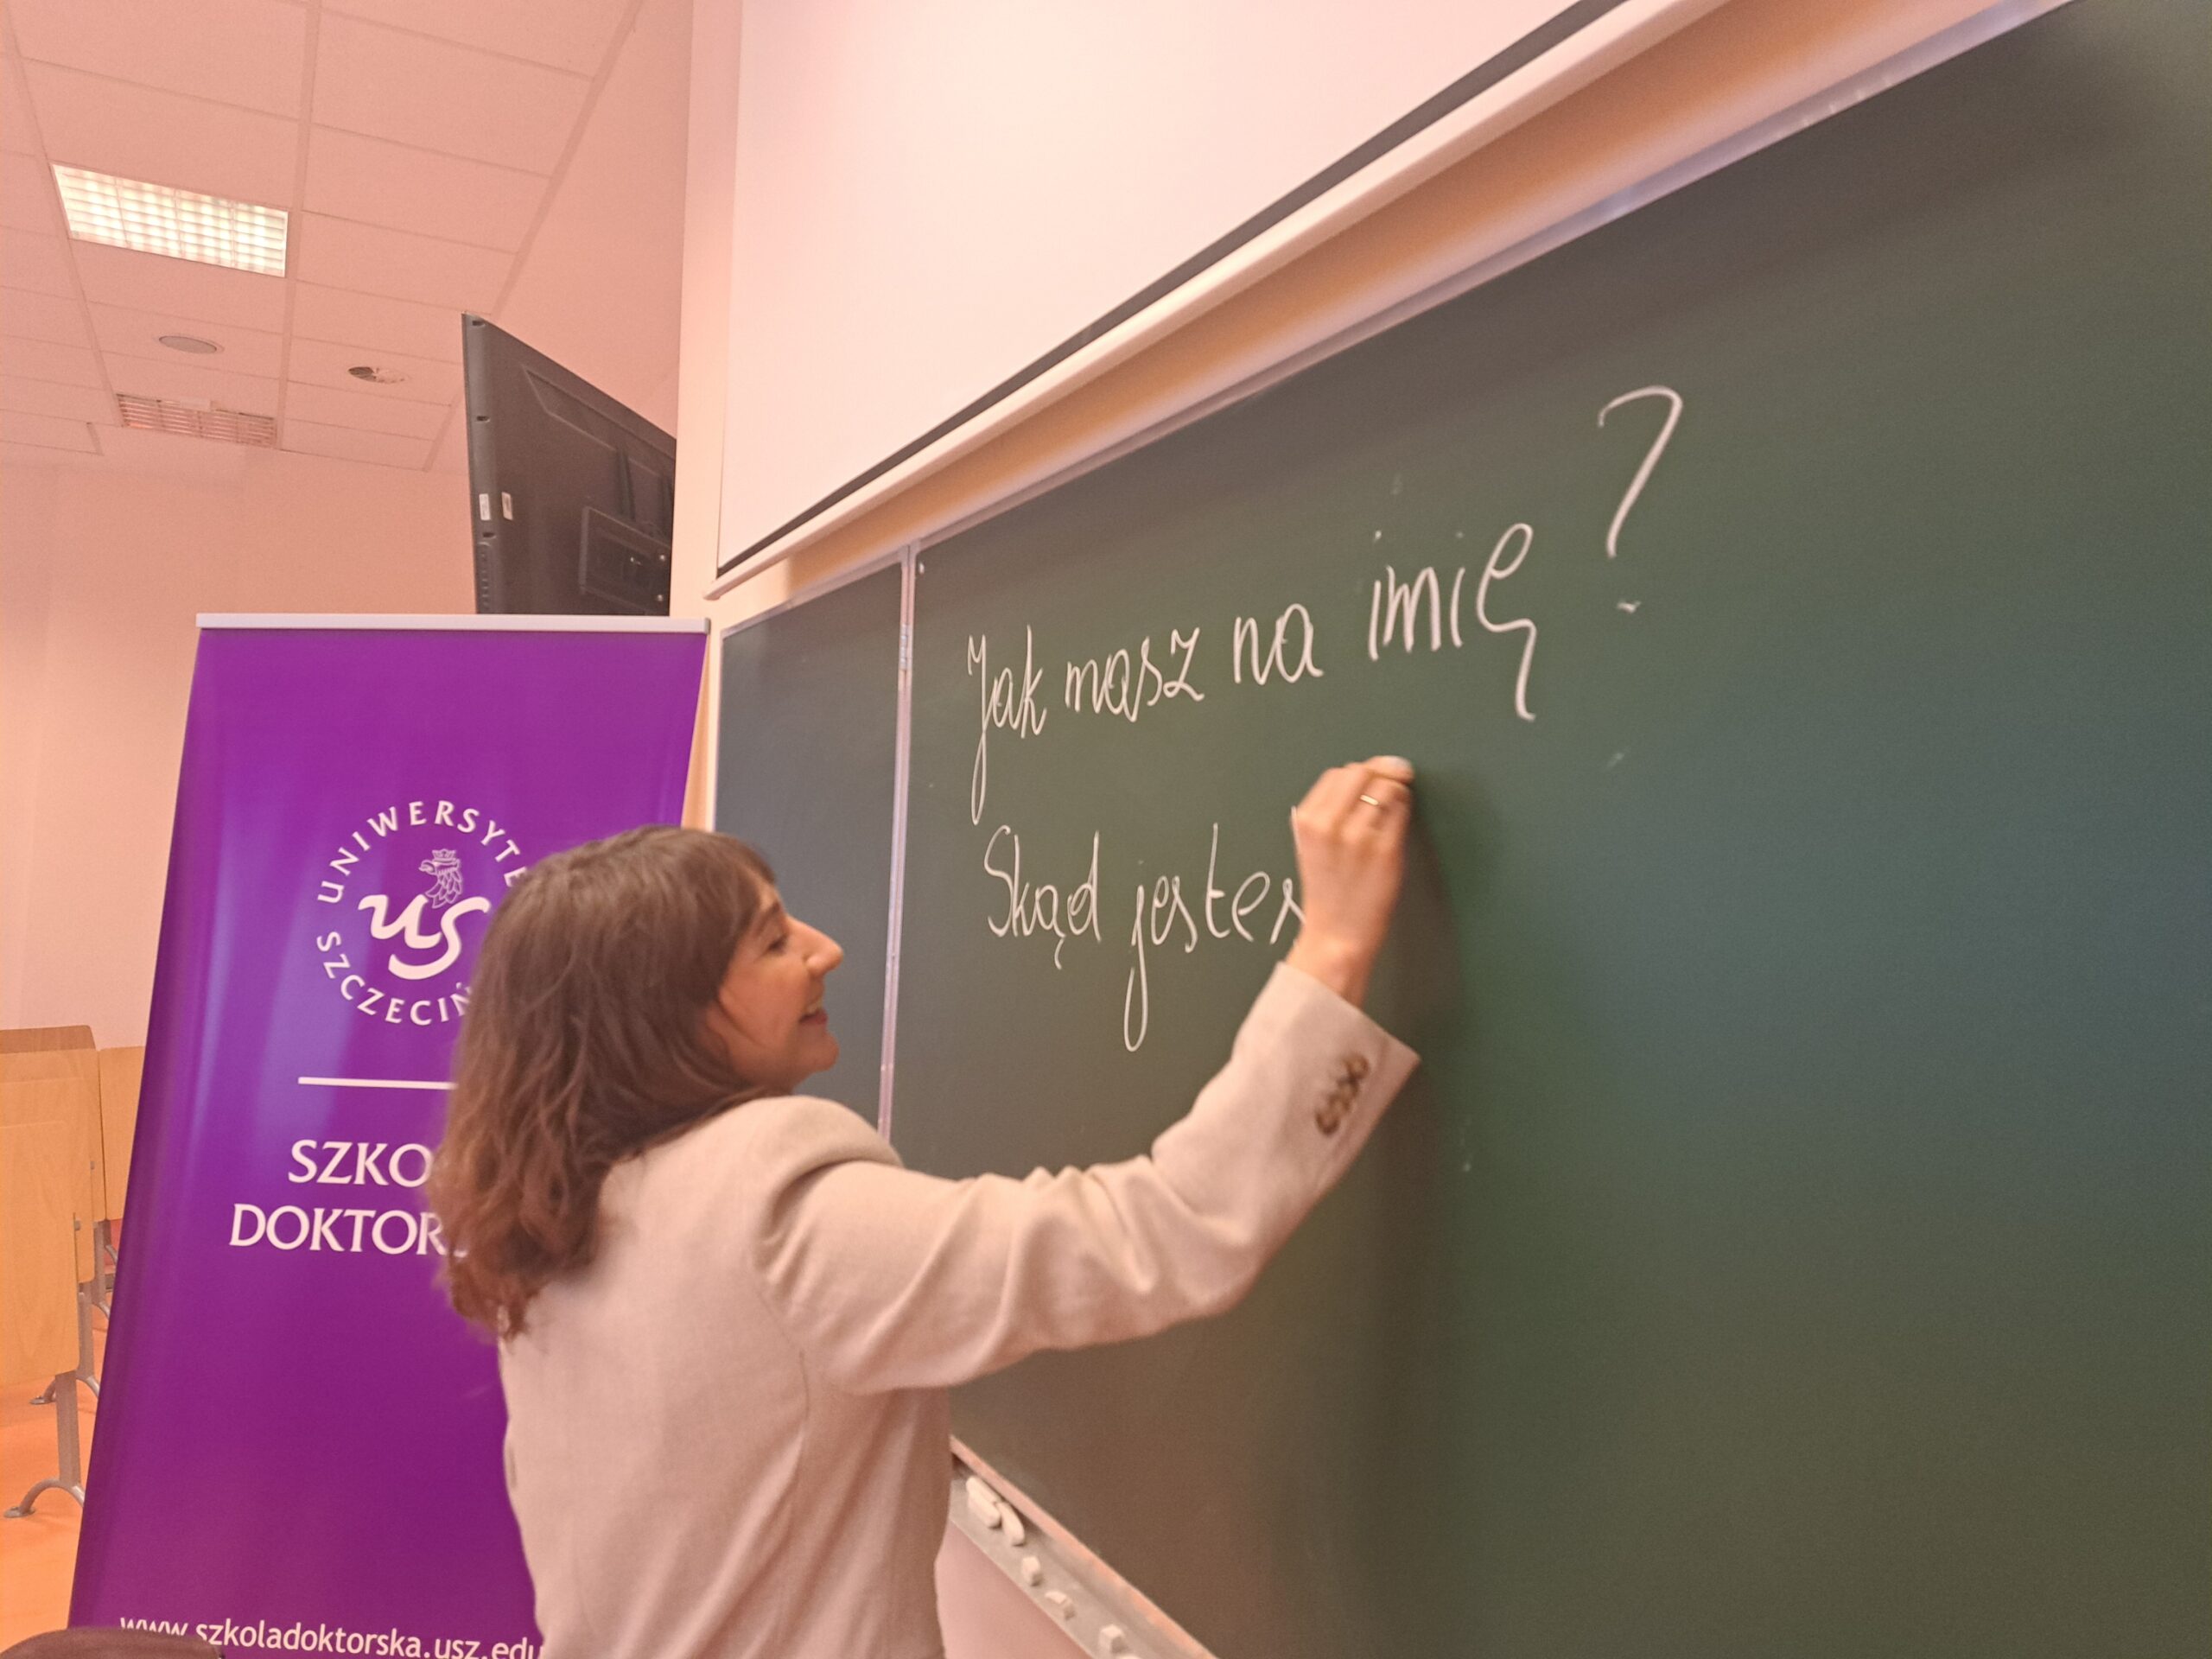 Polish language course for doctoral students studying in English